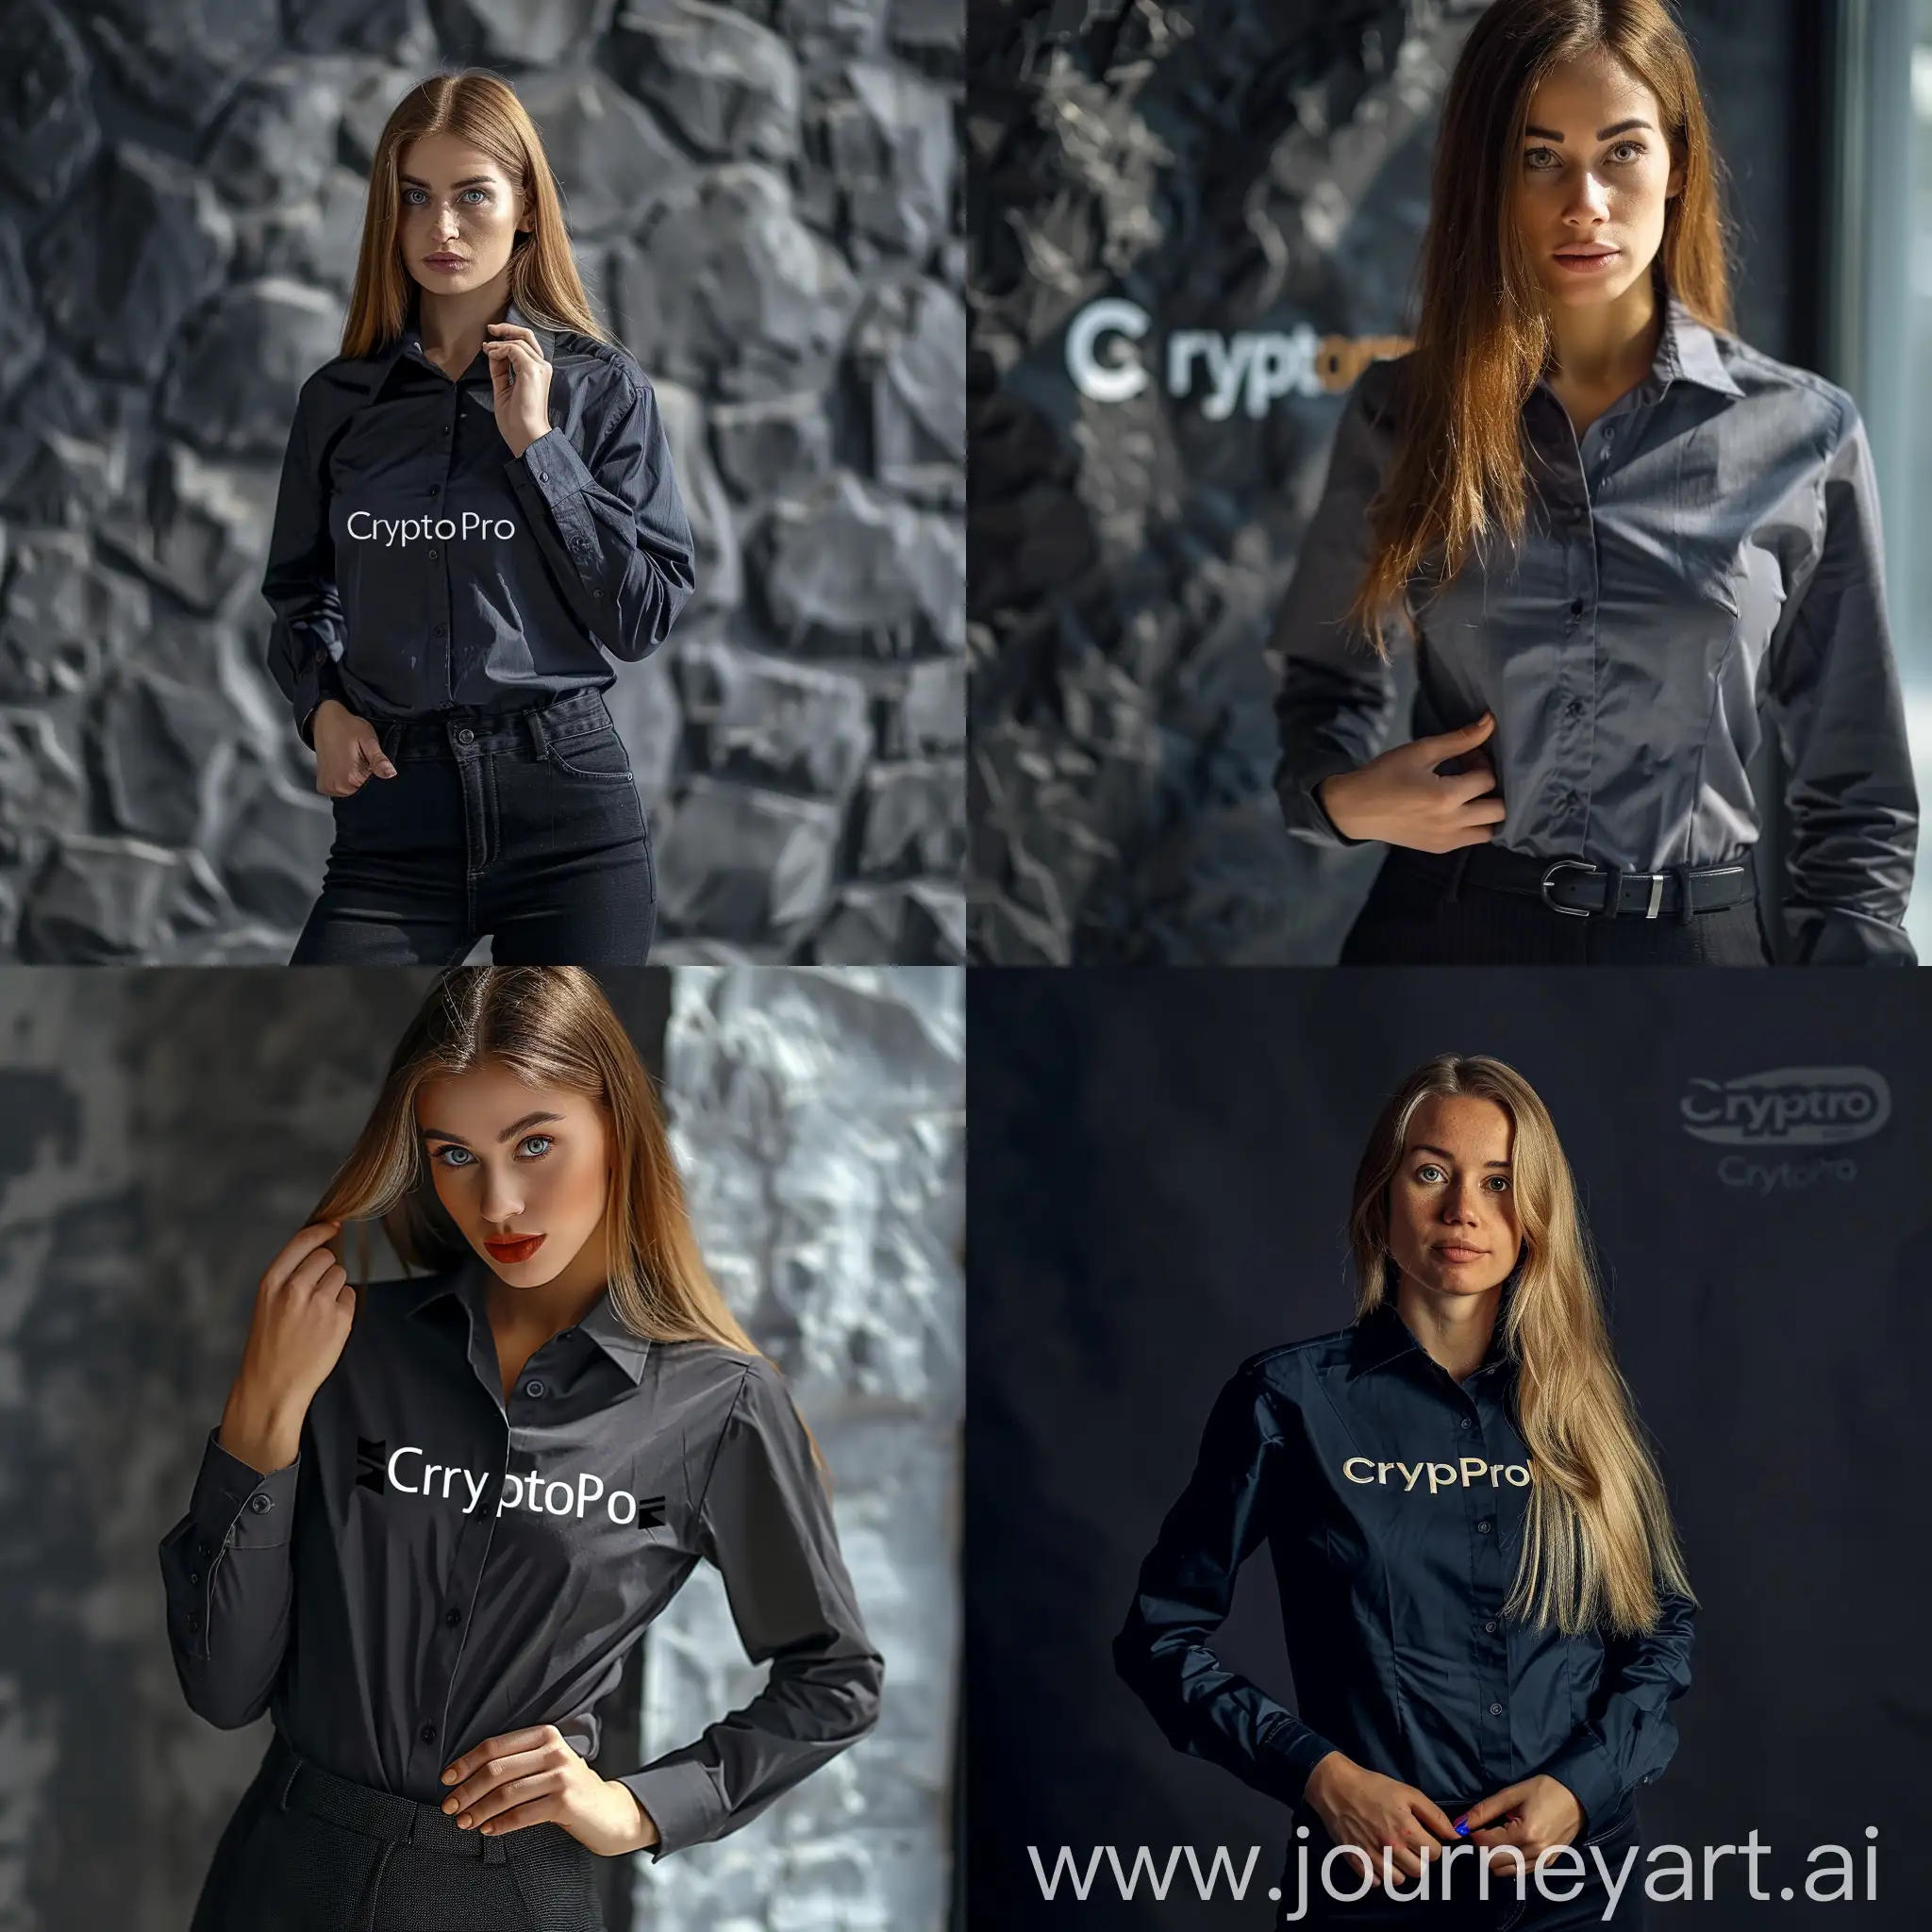 Professional-Woman-in-CryptoPro-Business-Shirt